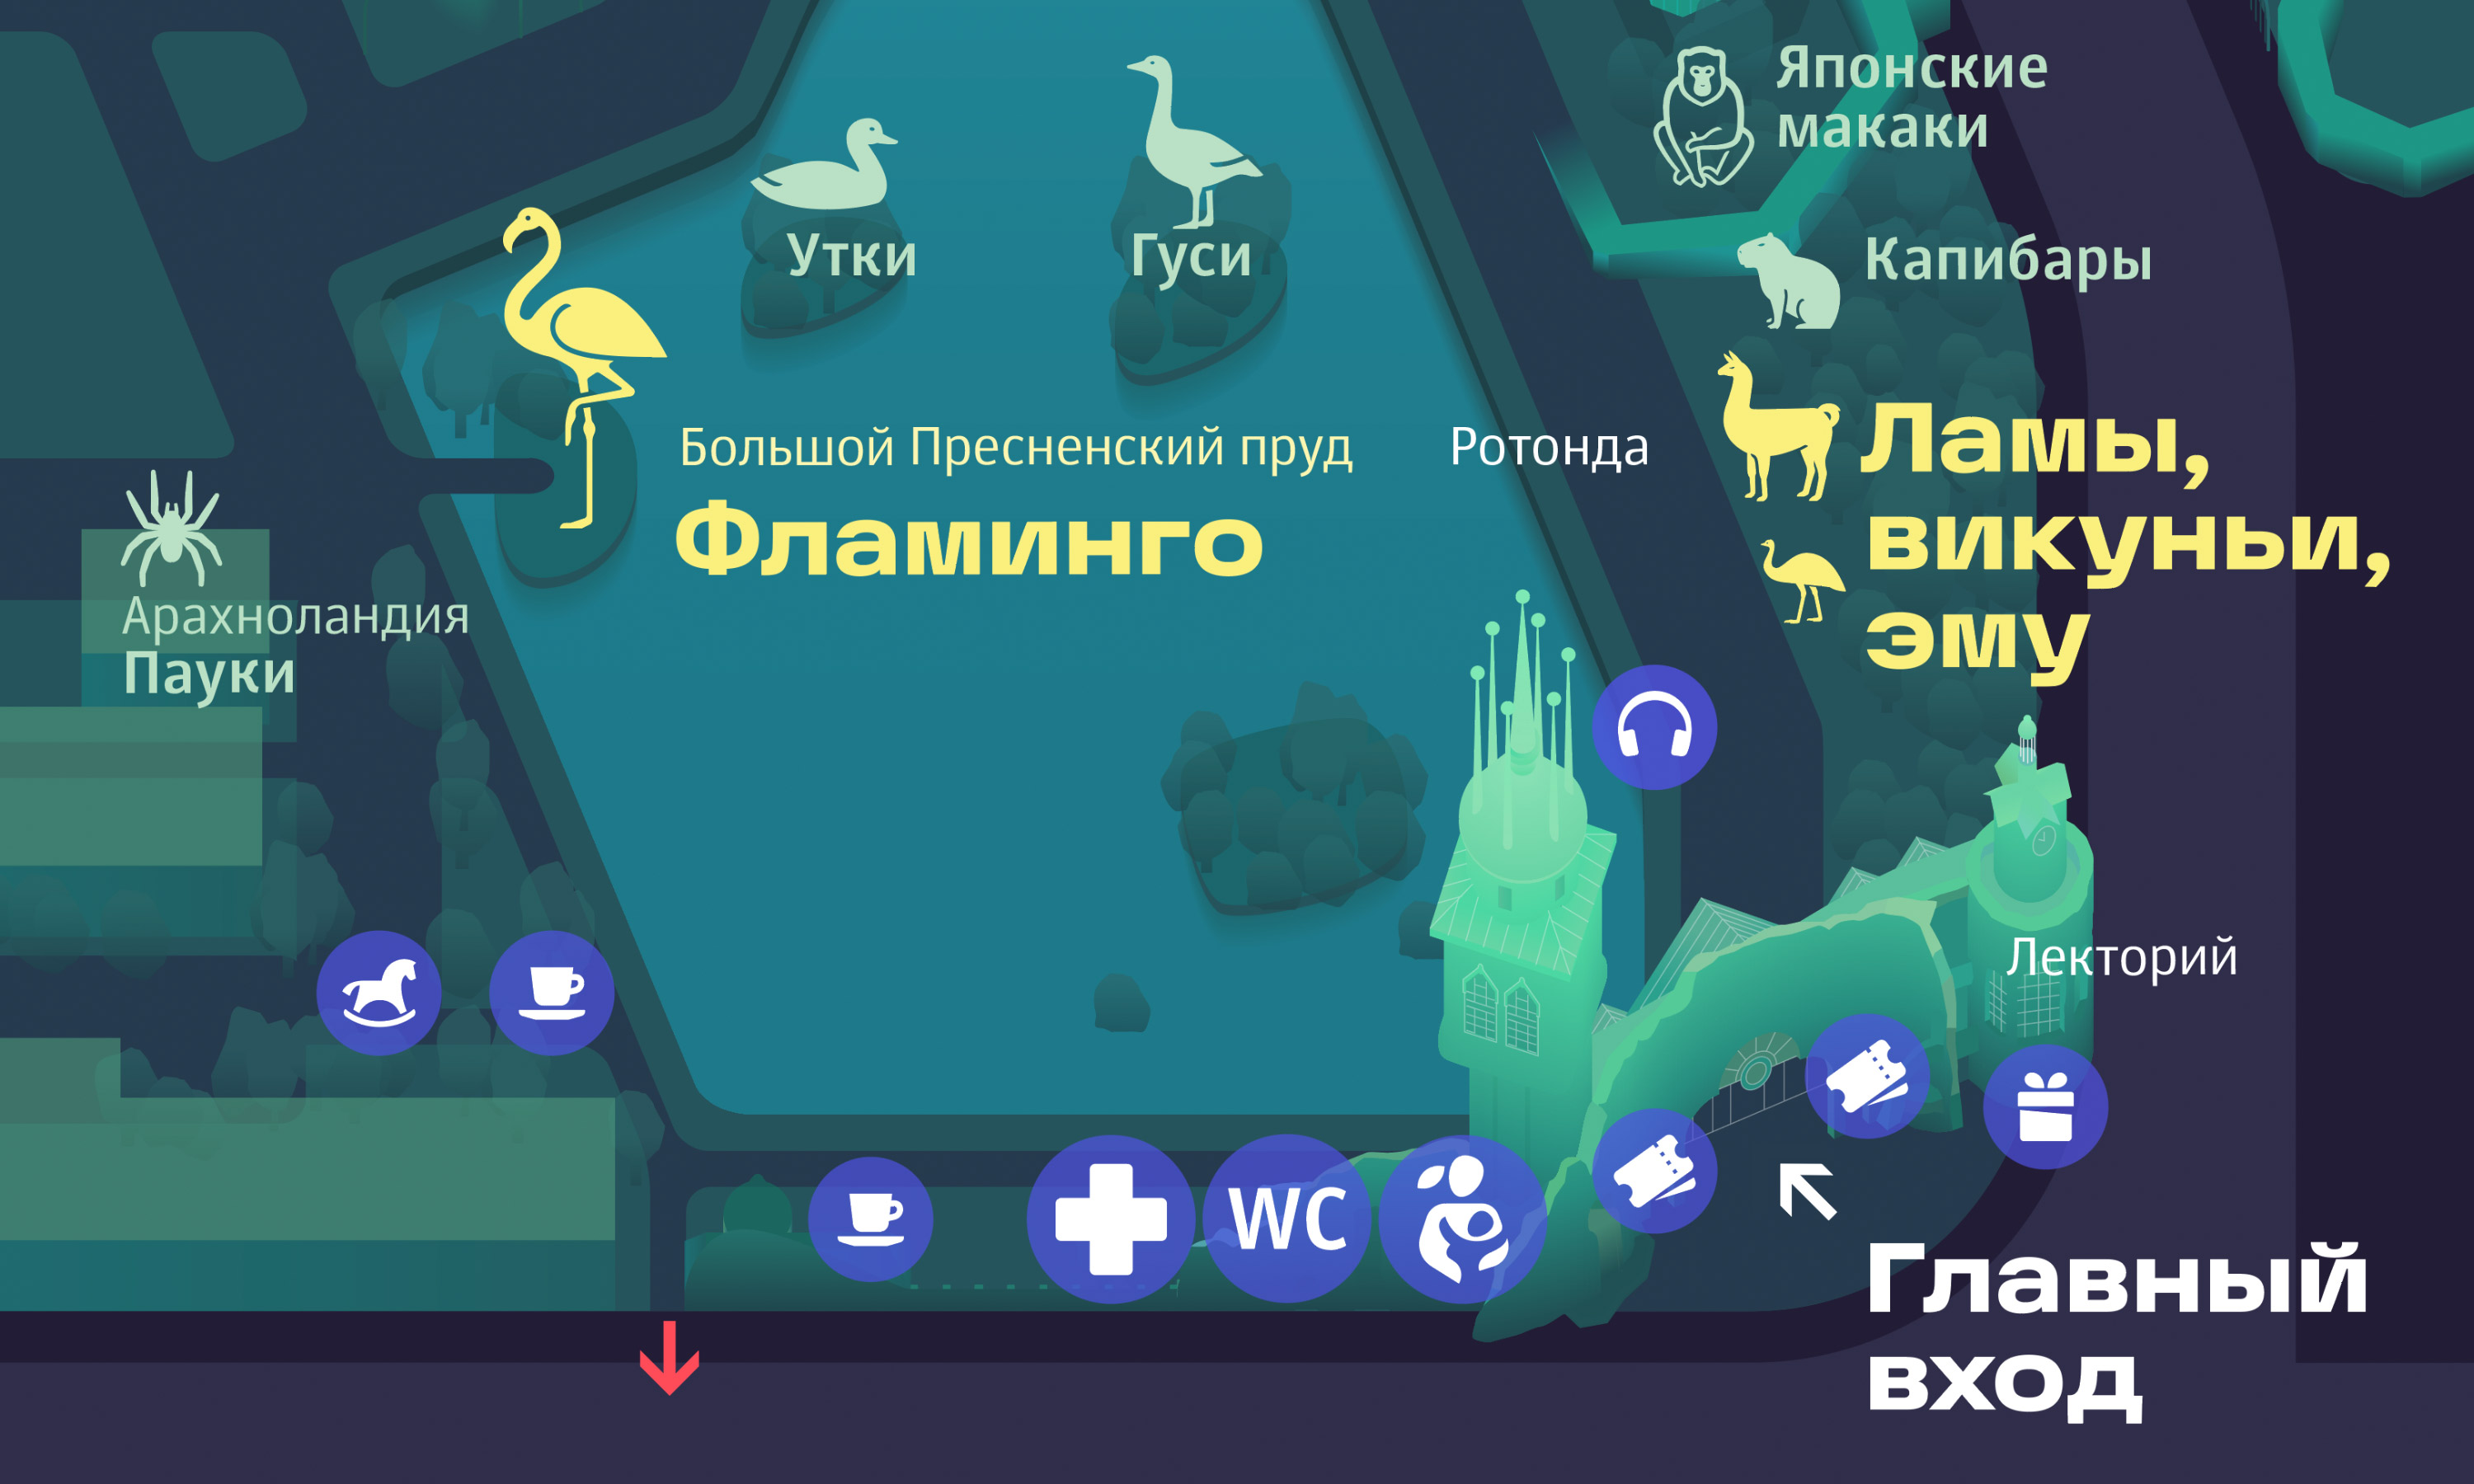 moscow zoo navigation map details 03